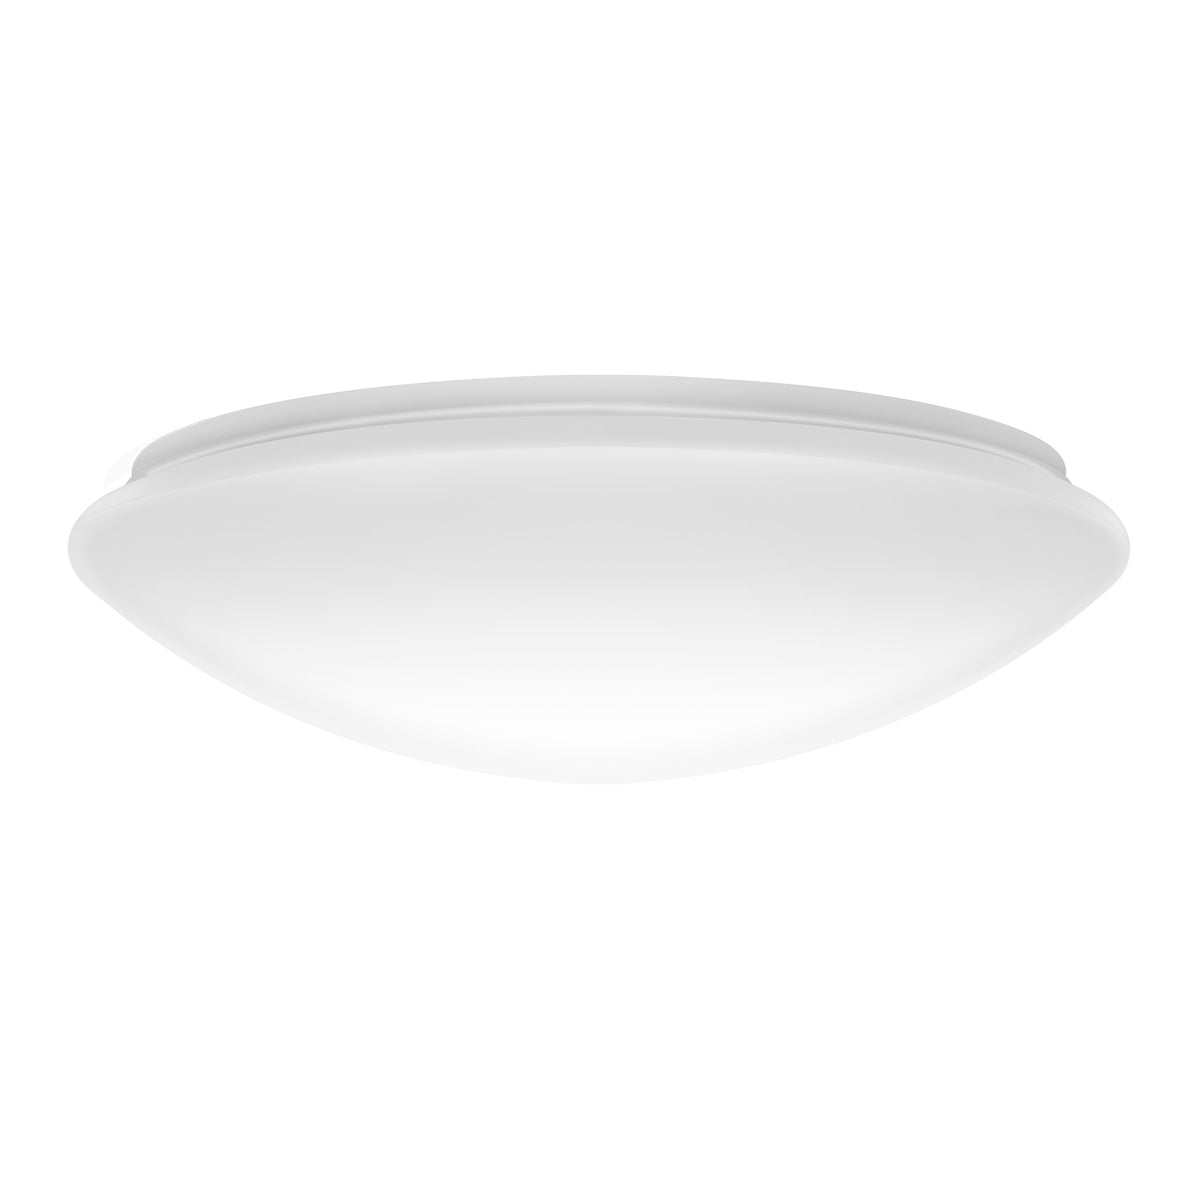 12inch Flush Mount LED Ceiling Light Fixture, 18W, 3000K, 1500LM, Brushed Nickel Saturn Dimmable Lighting for Hallway Bathroom Kitchen or Stairwell